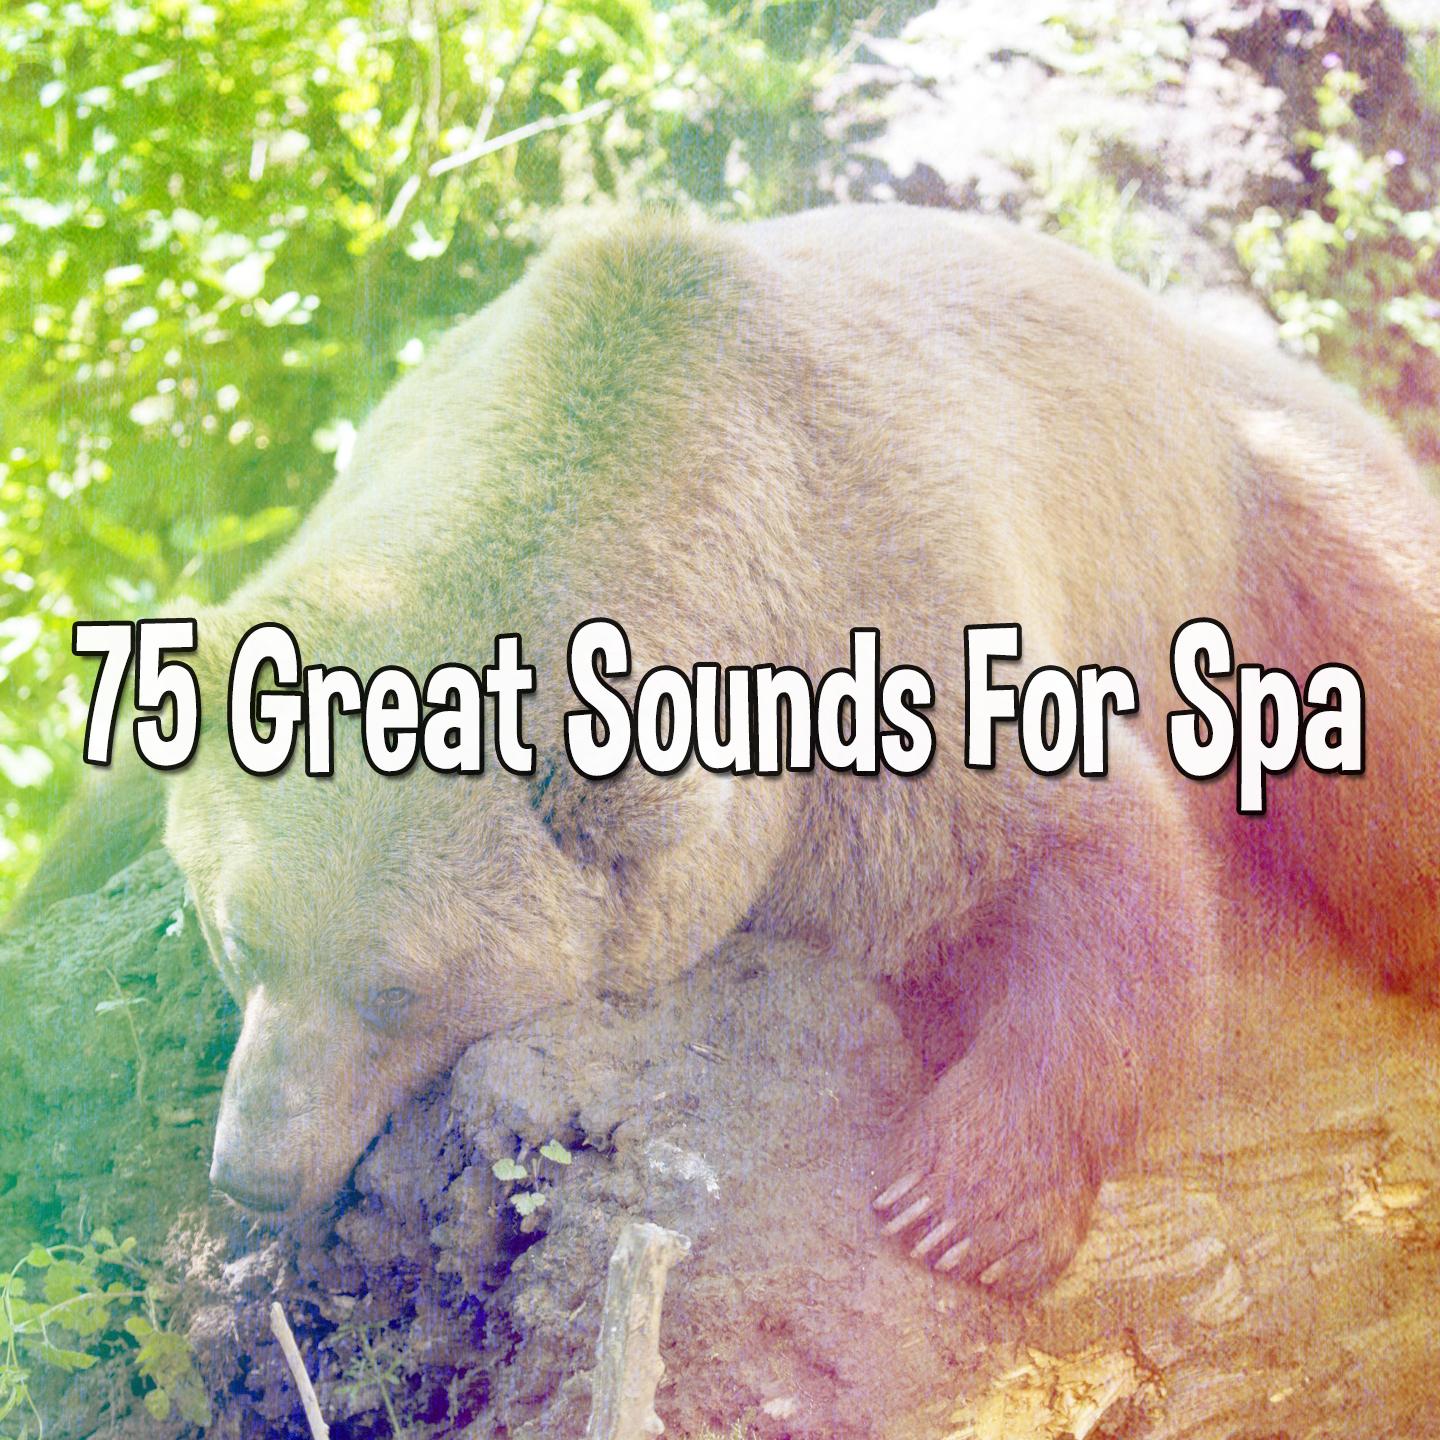 75 Great Sounds For Spa